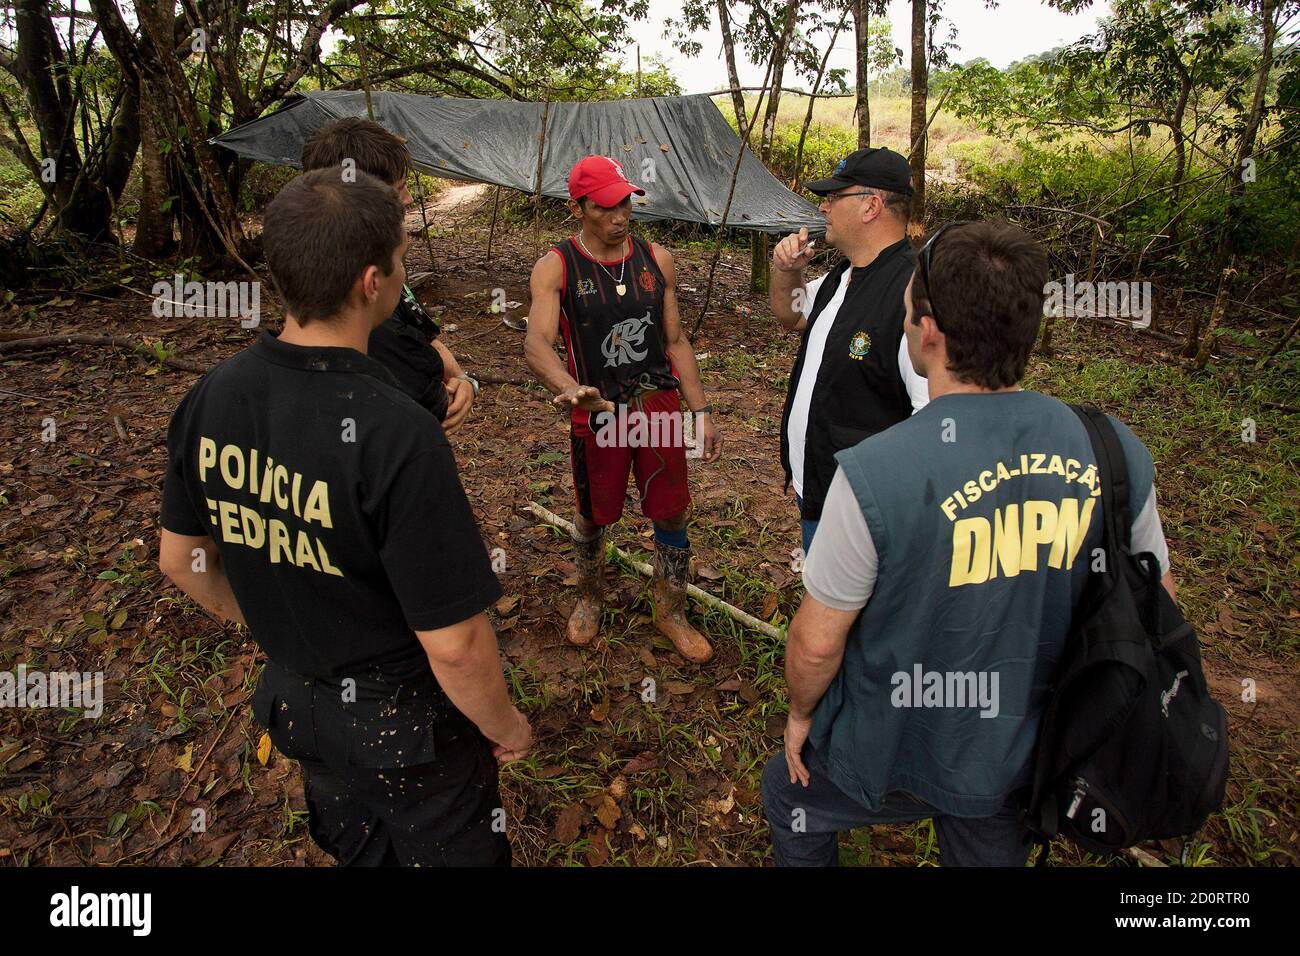 A wildcat miner is questioned by Brazilian Army soldiers and Federal Police officers about his activities, during a patrol for drug smugglers and illegal gold mines along the Cassipore River near the border with French Guiana, in this picture taken May 9, 2012. Brazil's Army began Operation Agate with the Federal Police, Customs, the National Aviation Agency, and the government's environmental police force (IBAMA), along a large part of the northern border to combat smuggling and environmental crimes, according to an Army communique. Picture taken May 9, 2012. REUTERS/Paulo Santos (BRAZIL - Ta Stock Photo